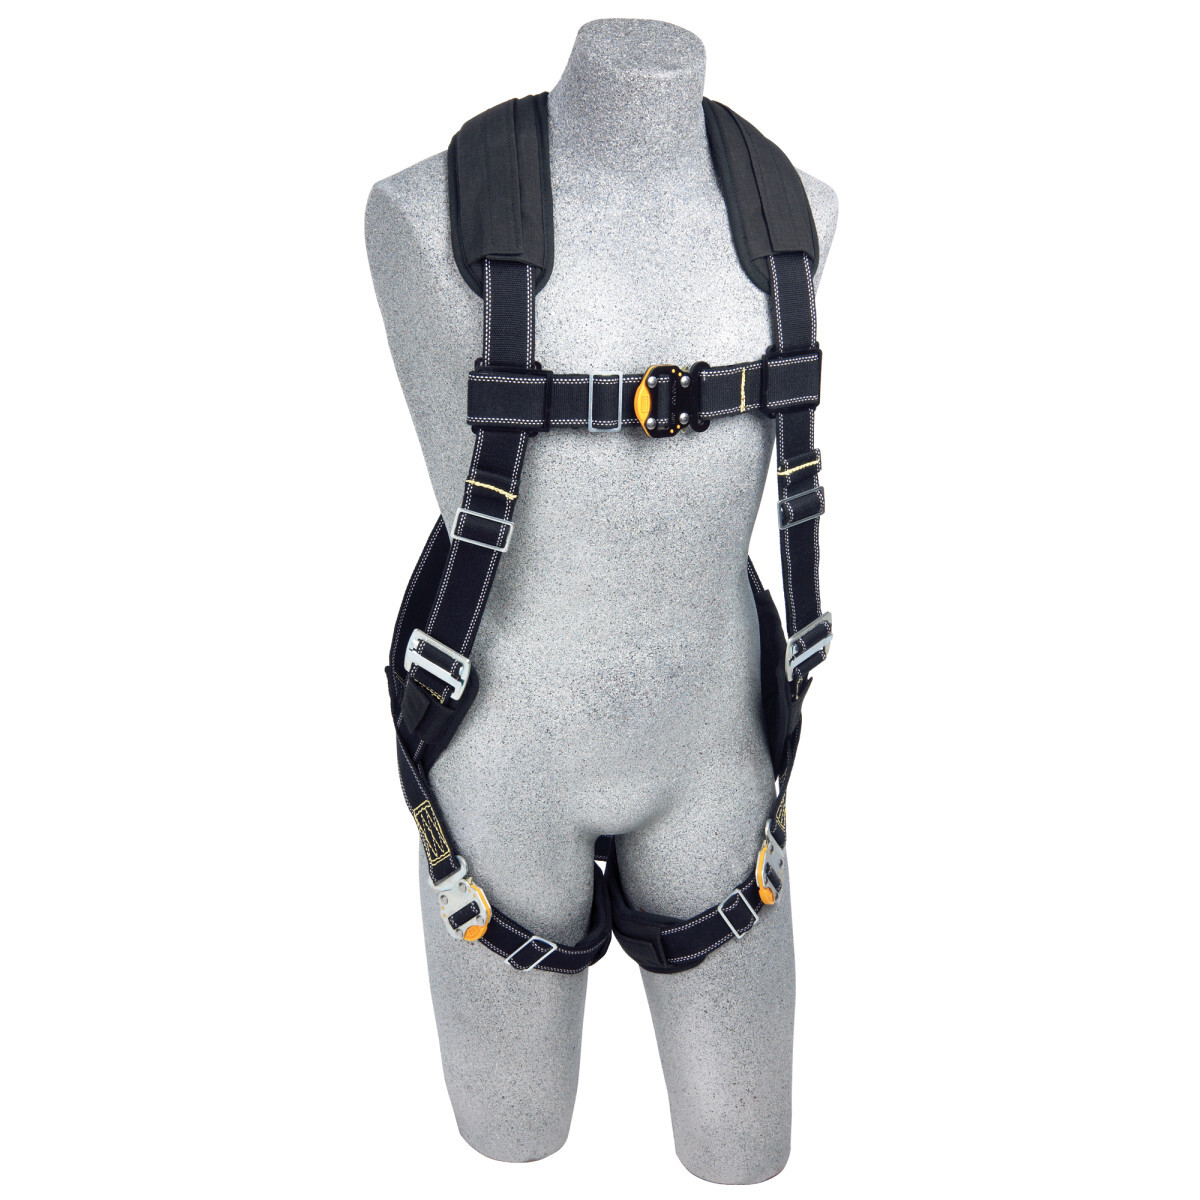 3M™ DBI-SALA® Large ExoFit™ XP Arc Flash Flame Resistant Full Body/Vest Style Harness With Back D-Ring, Comfort Padding, Leather